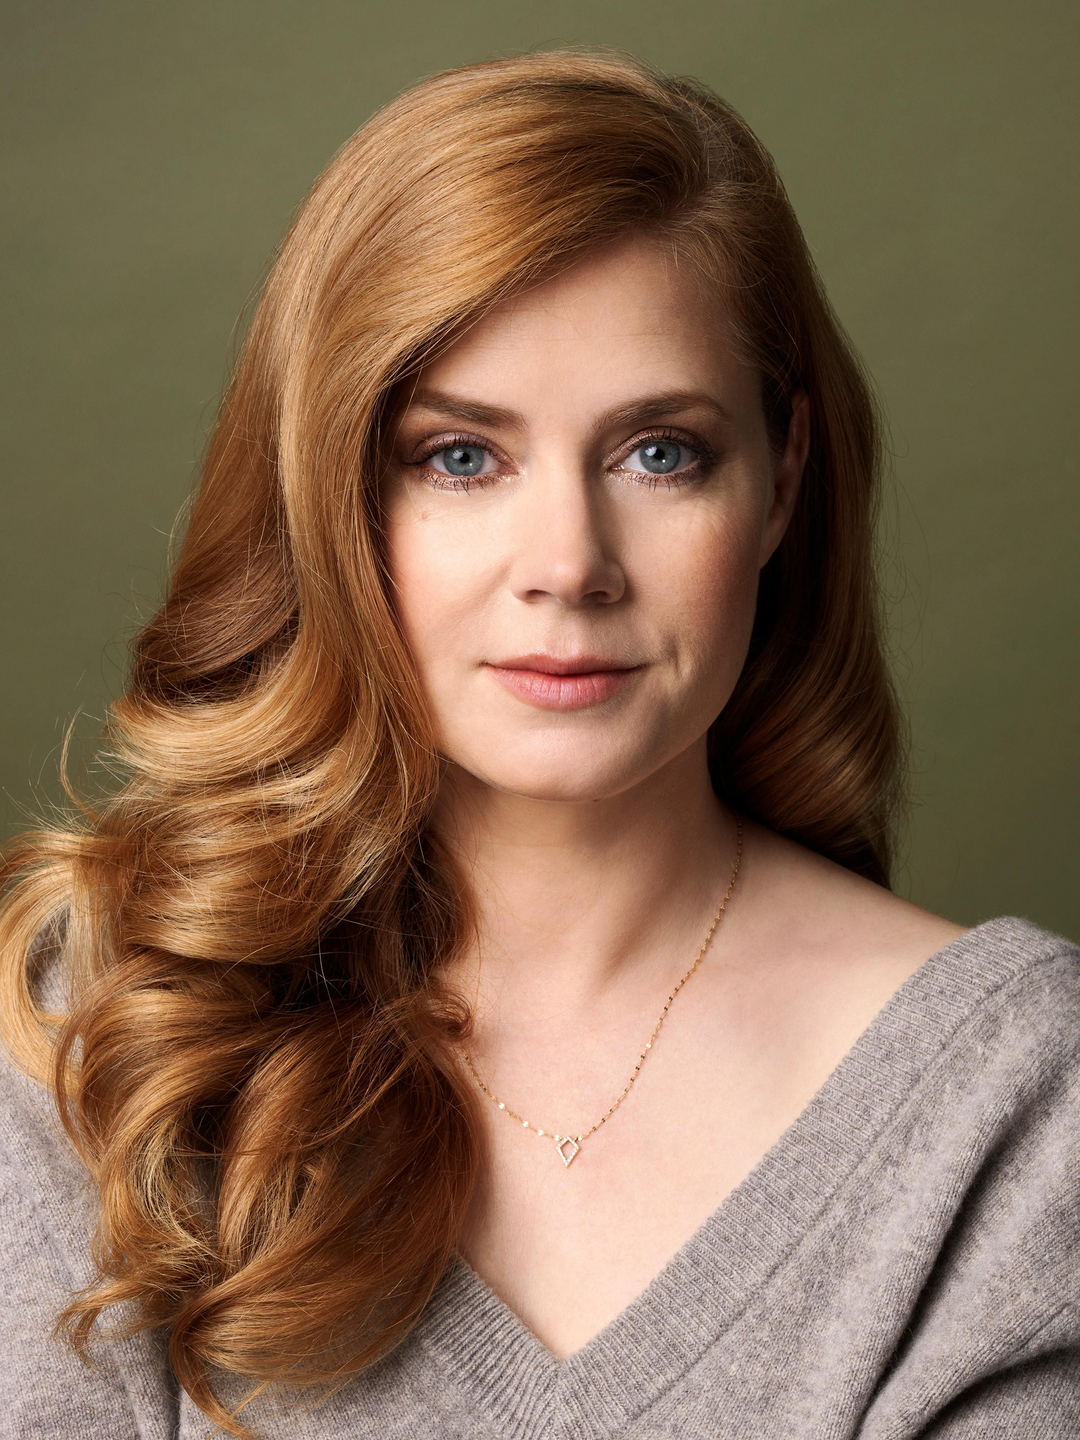 Amy Adams does she have kids